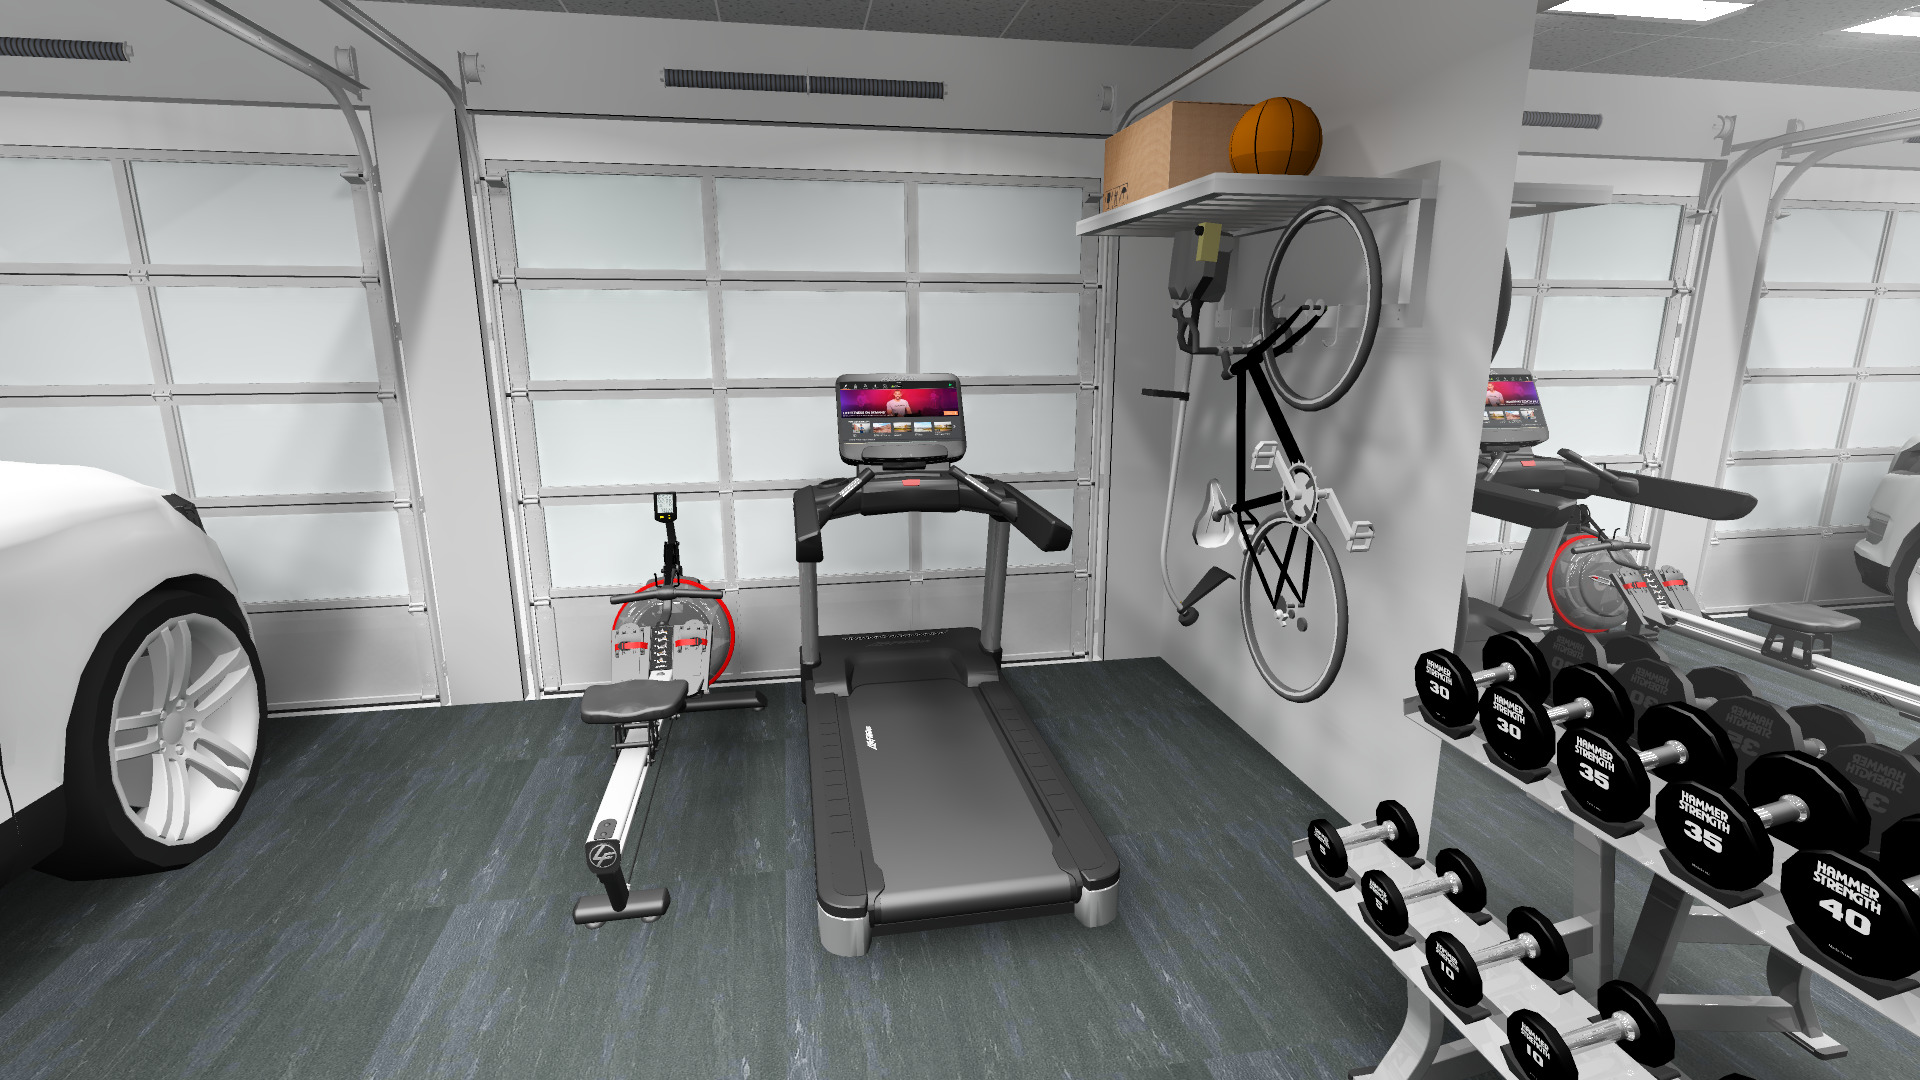 Small home gym: First considerations is garage is don't have space in home